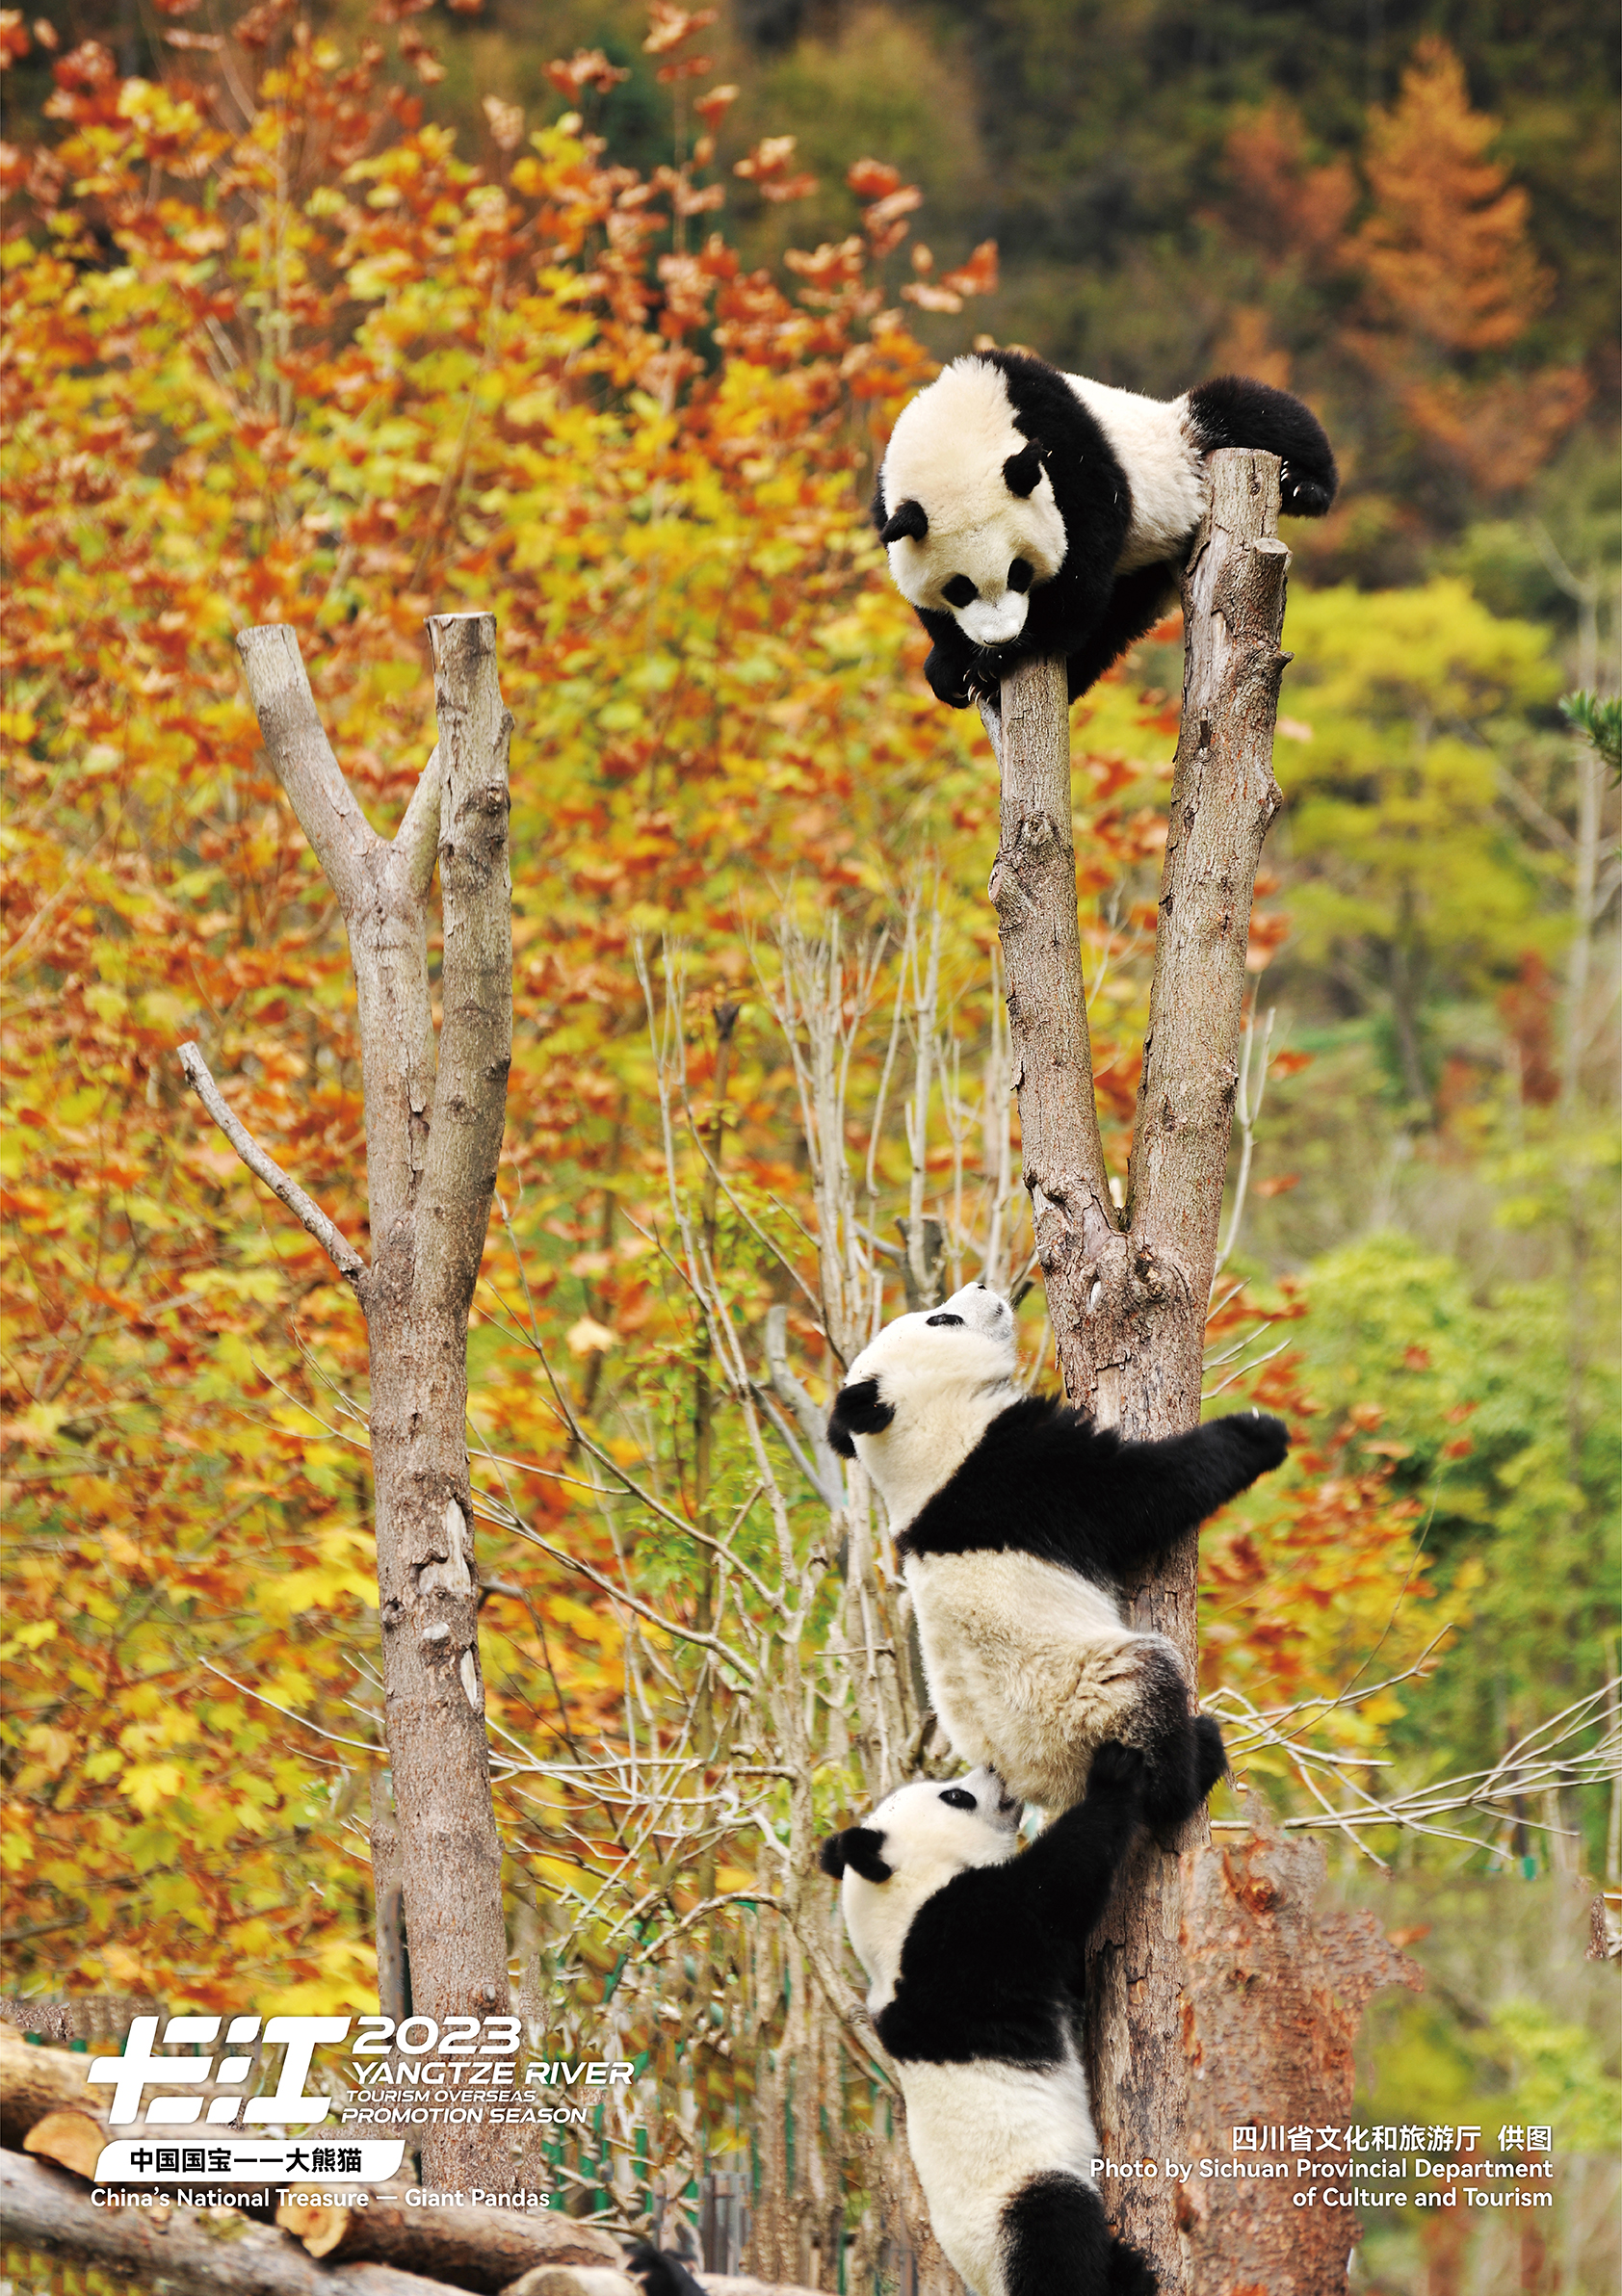 This undated photo shows three giant pandas frolicking in a tree in southwest China's Sichuan Province. /Photo provided to CGTN